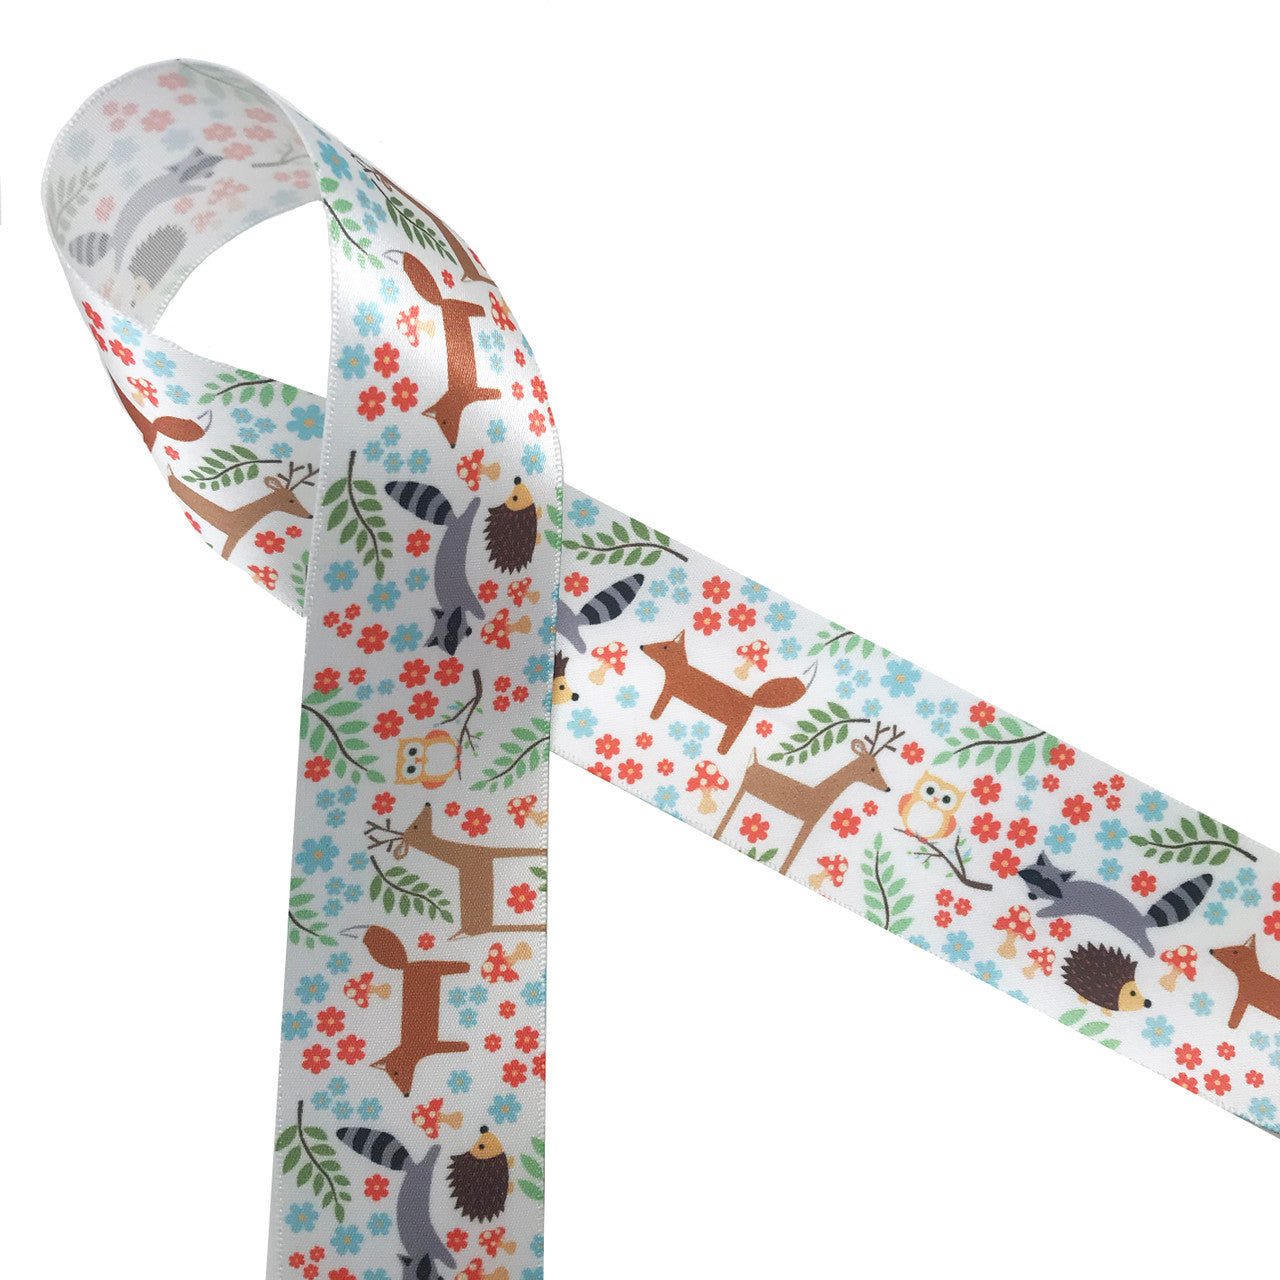 Woodland animals on1.5" white satin ribbon feature raccoon, deer, fox, owls and hedgehogs scattered among leafy branches, flowers and mushrooms! This is a great ribbon for baby showers, nurseries, gift wrap, quilting  and first birthday parties. Our ribbon is designed and printed in the USA